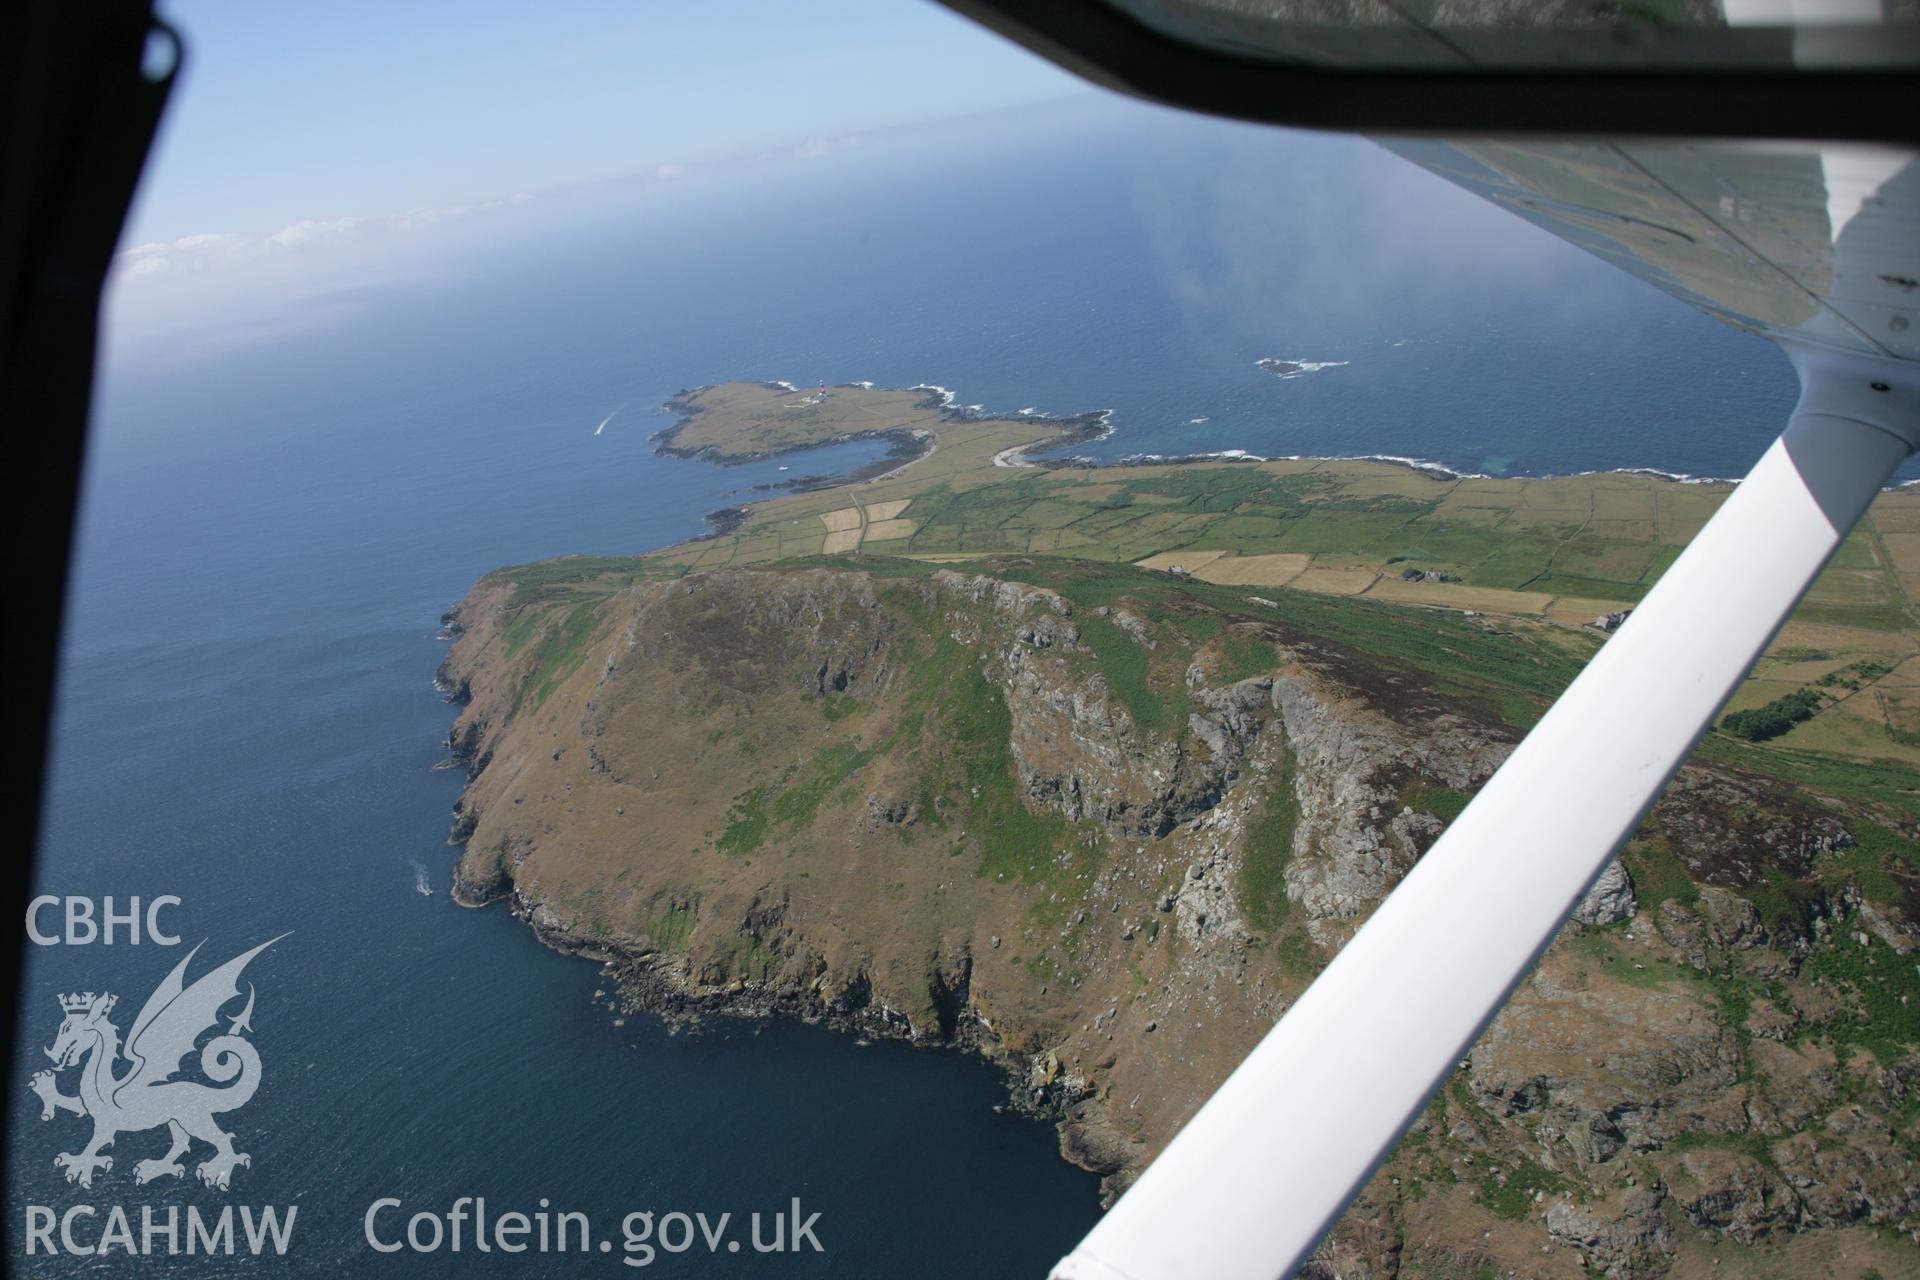 RCAHMW colour oblique aerial photograph of Bardsey Island (Ynys Enlli) showing the eastern cliffs and Mynydd Enlli from the north-east. Taken on 03 August 2006 by Toby Driver.